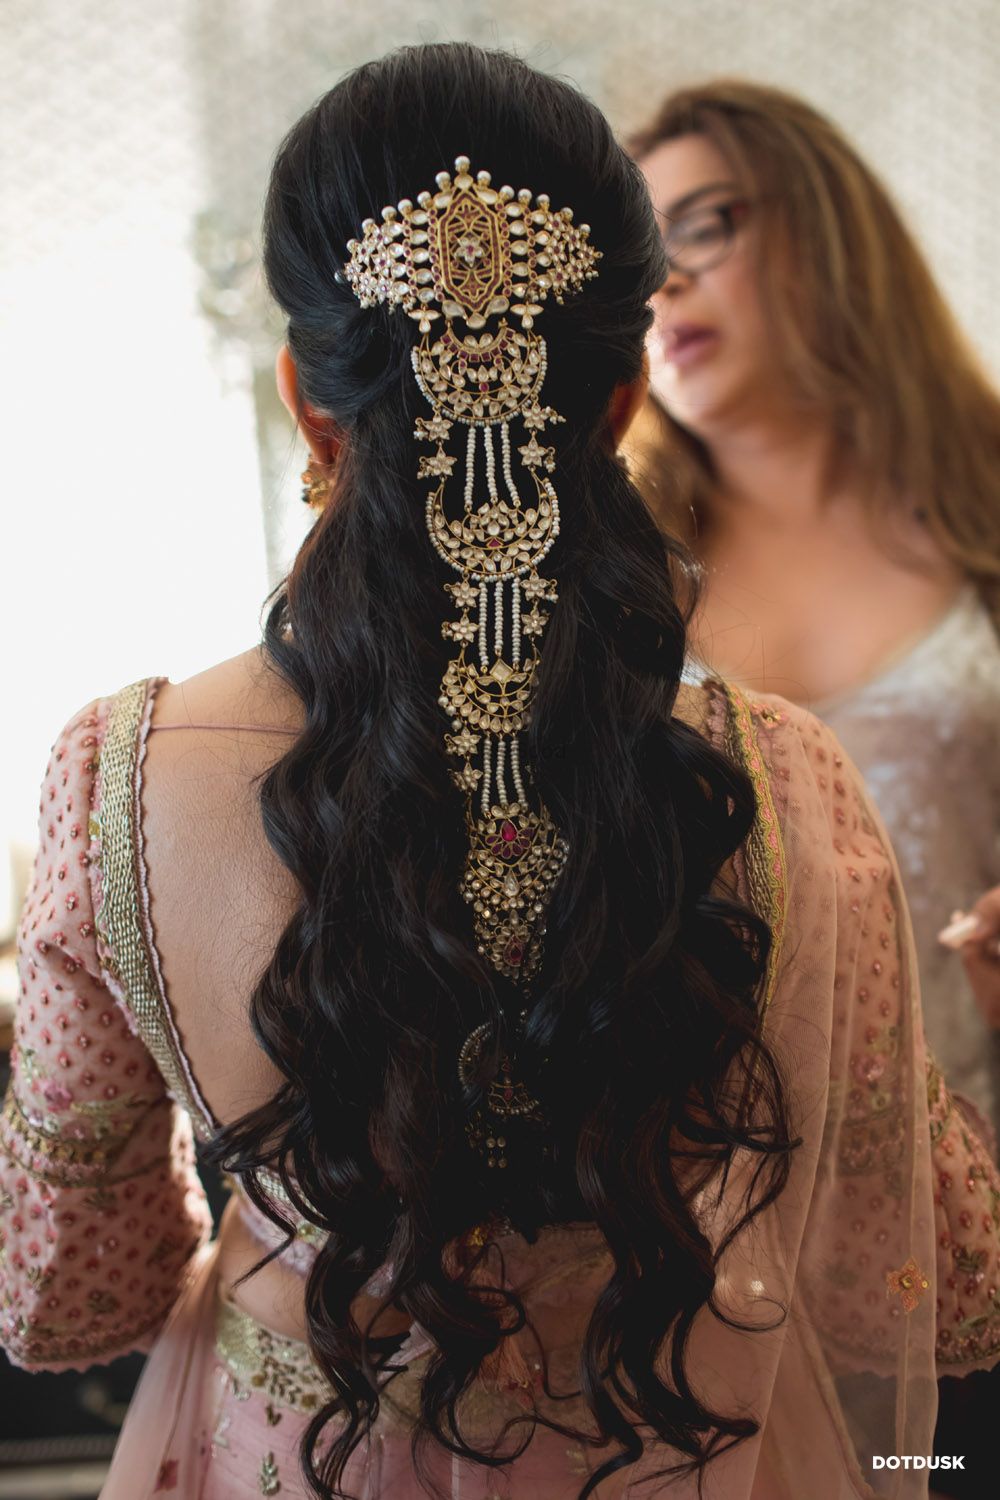 Photo of A pretty hair accessory for the bride on her wedding day.